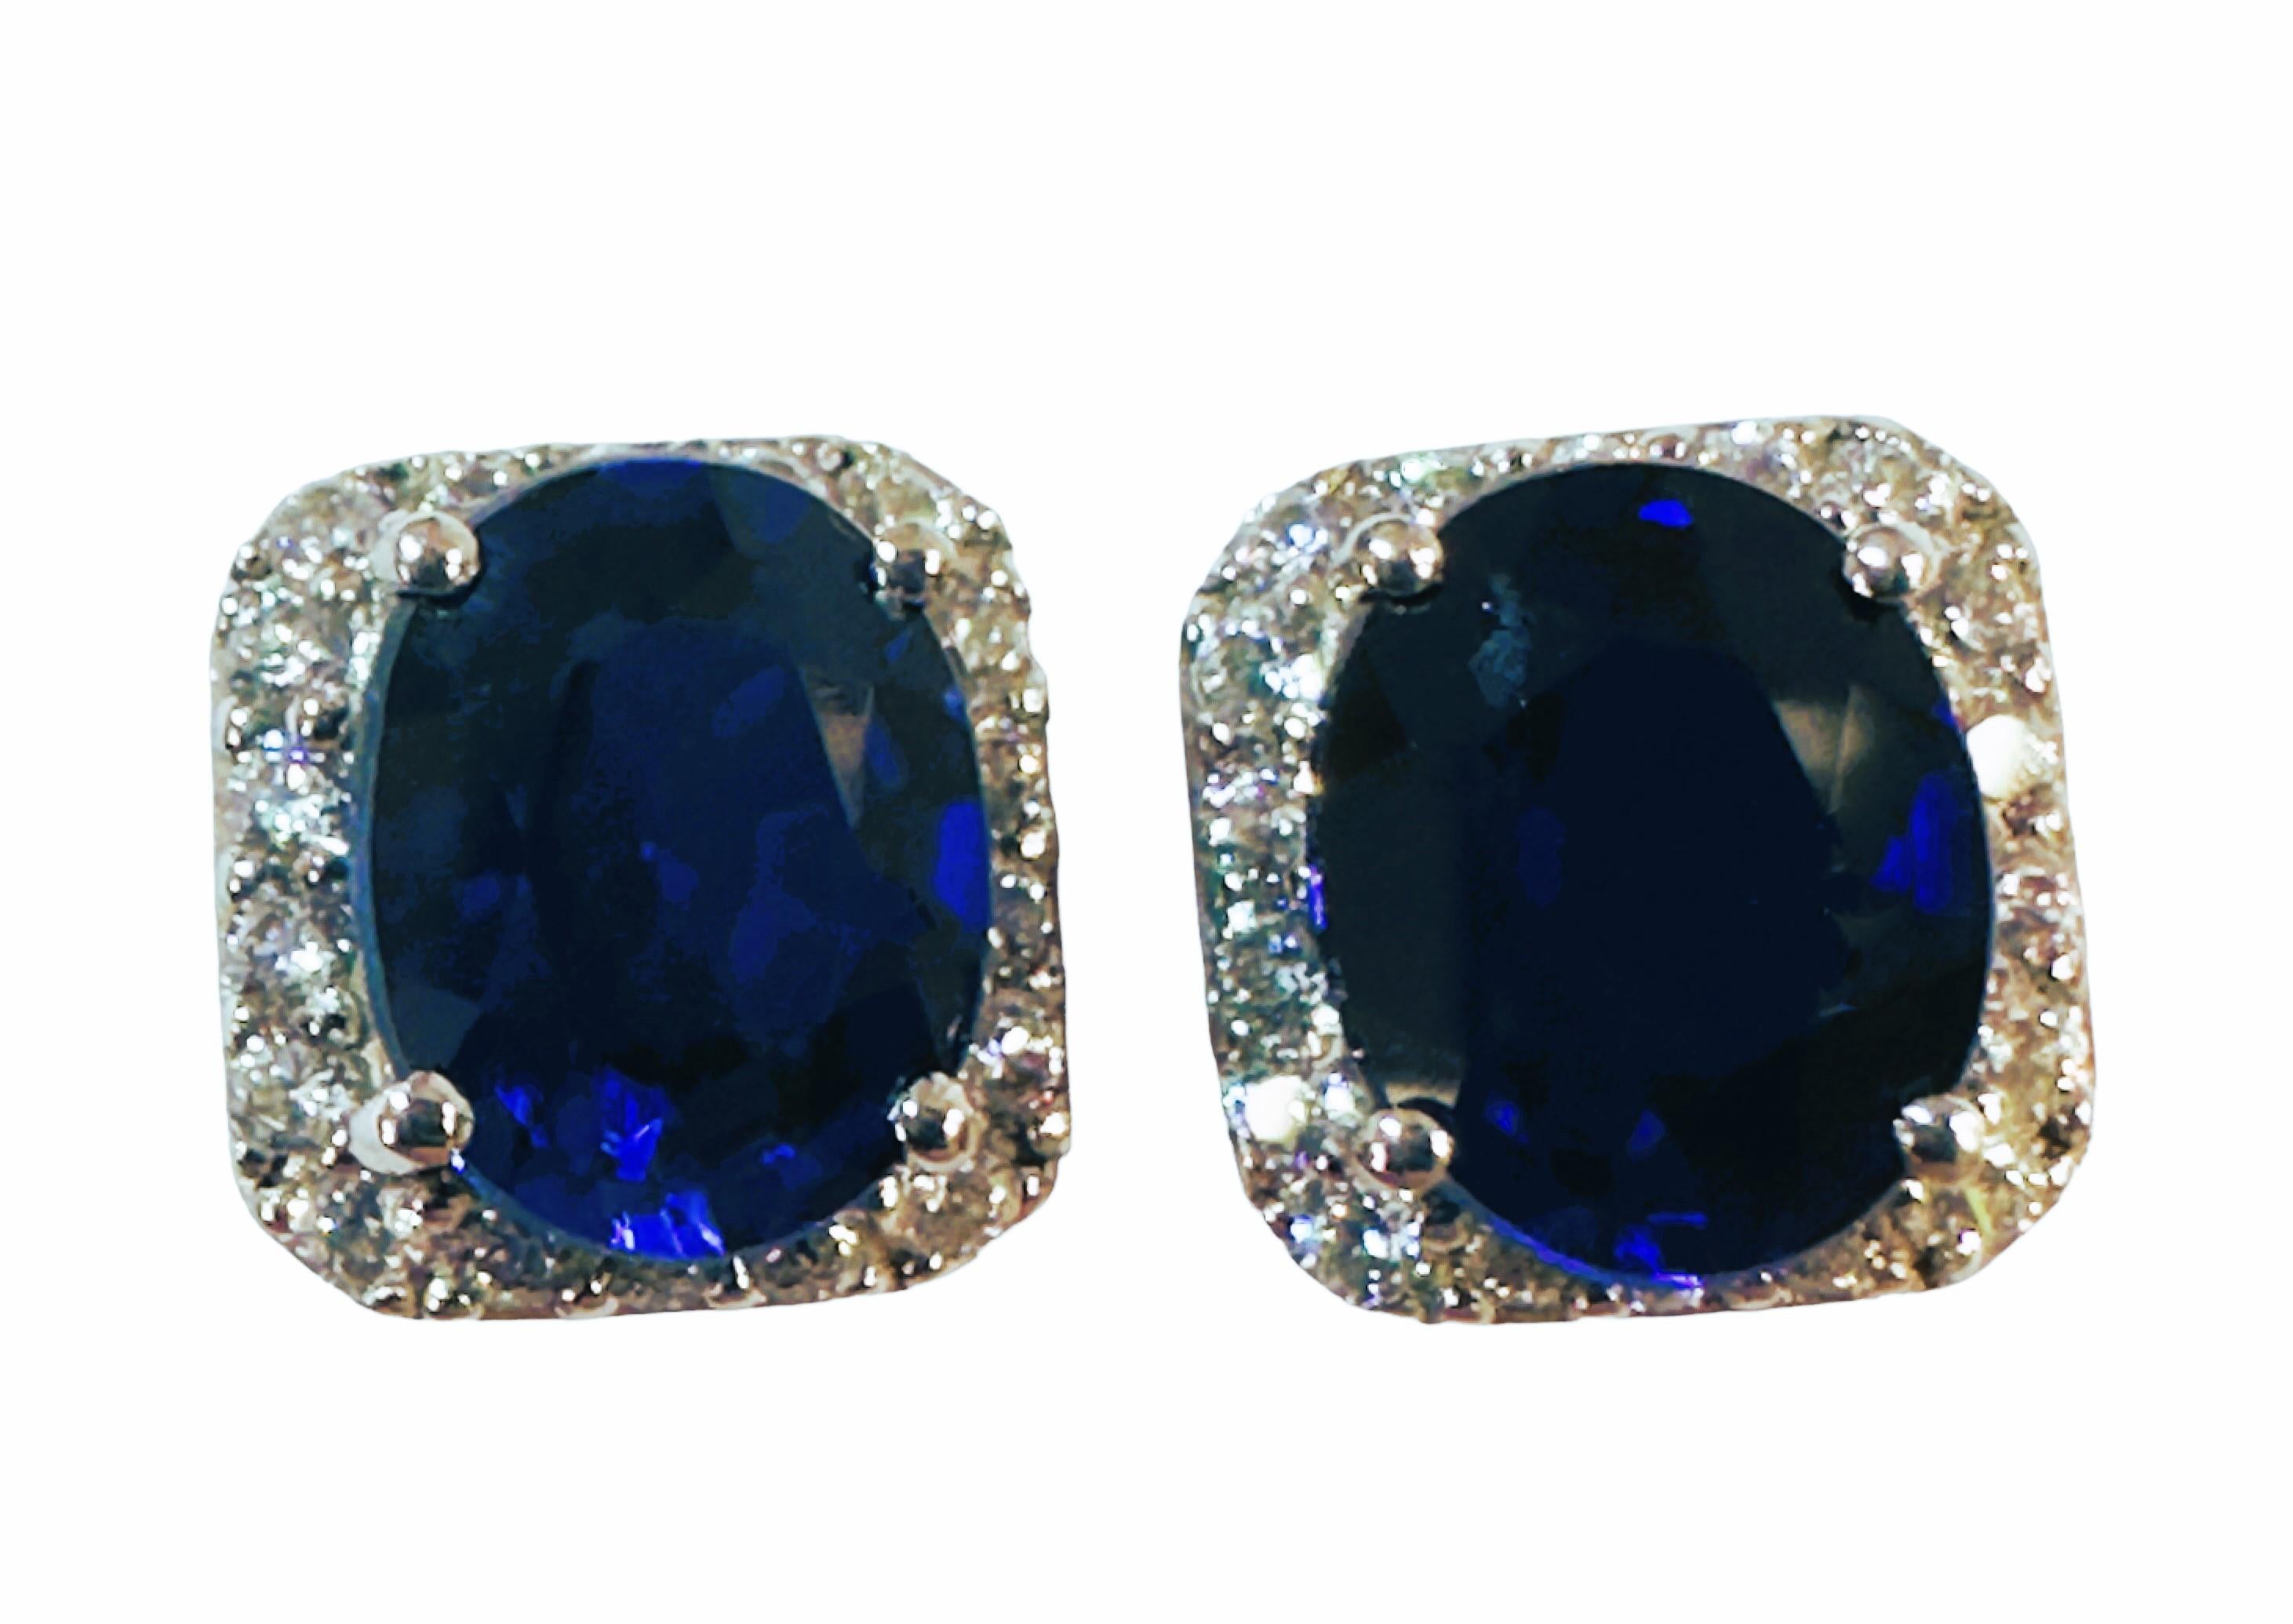 Taille ovale New African 4.10 ct Deep Blue Sapphire Sterling Post Earrings